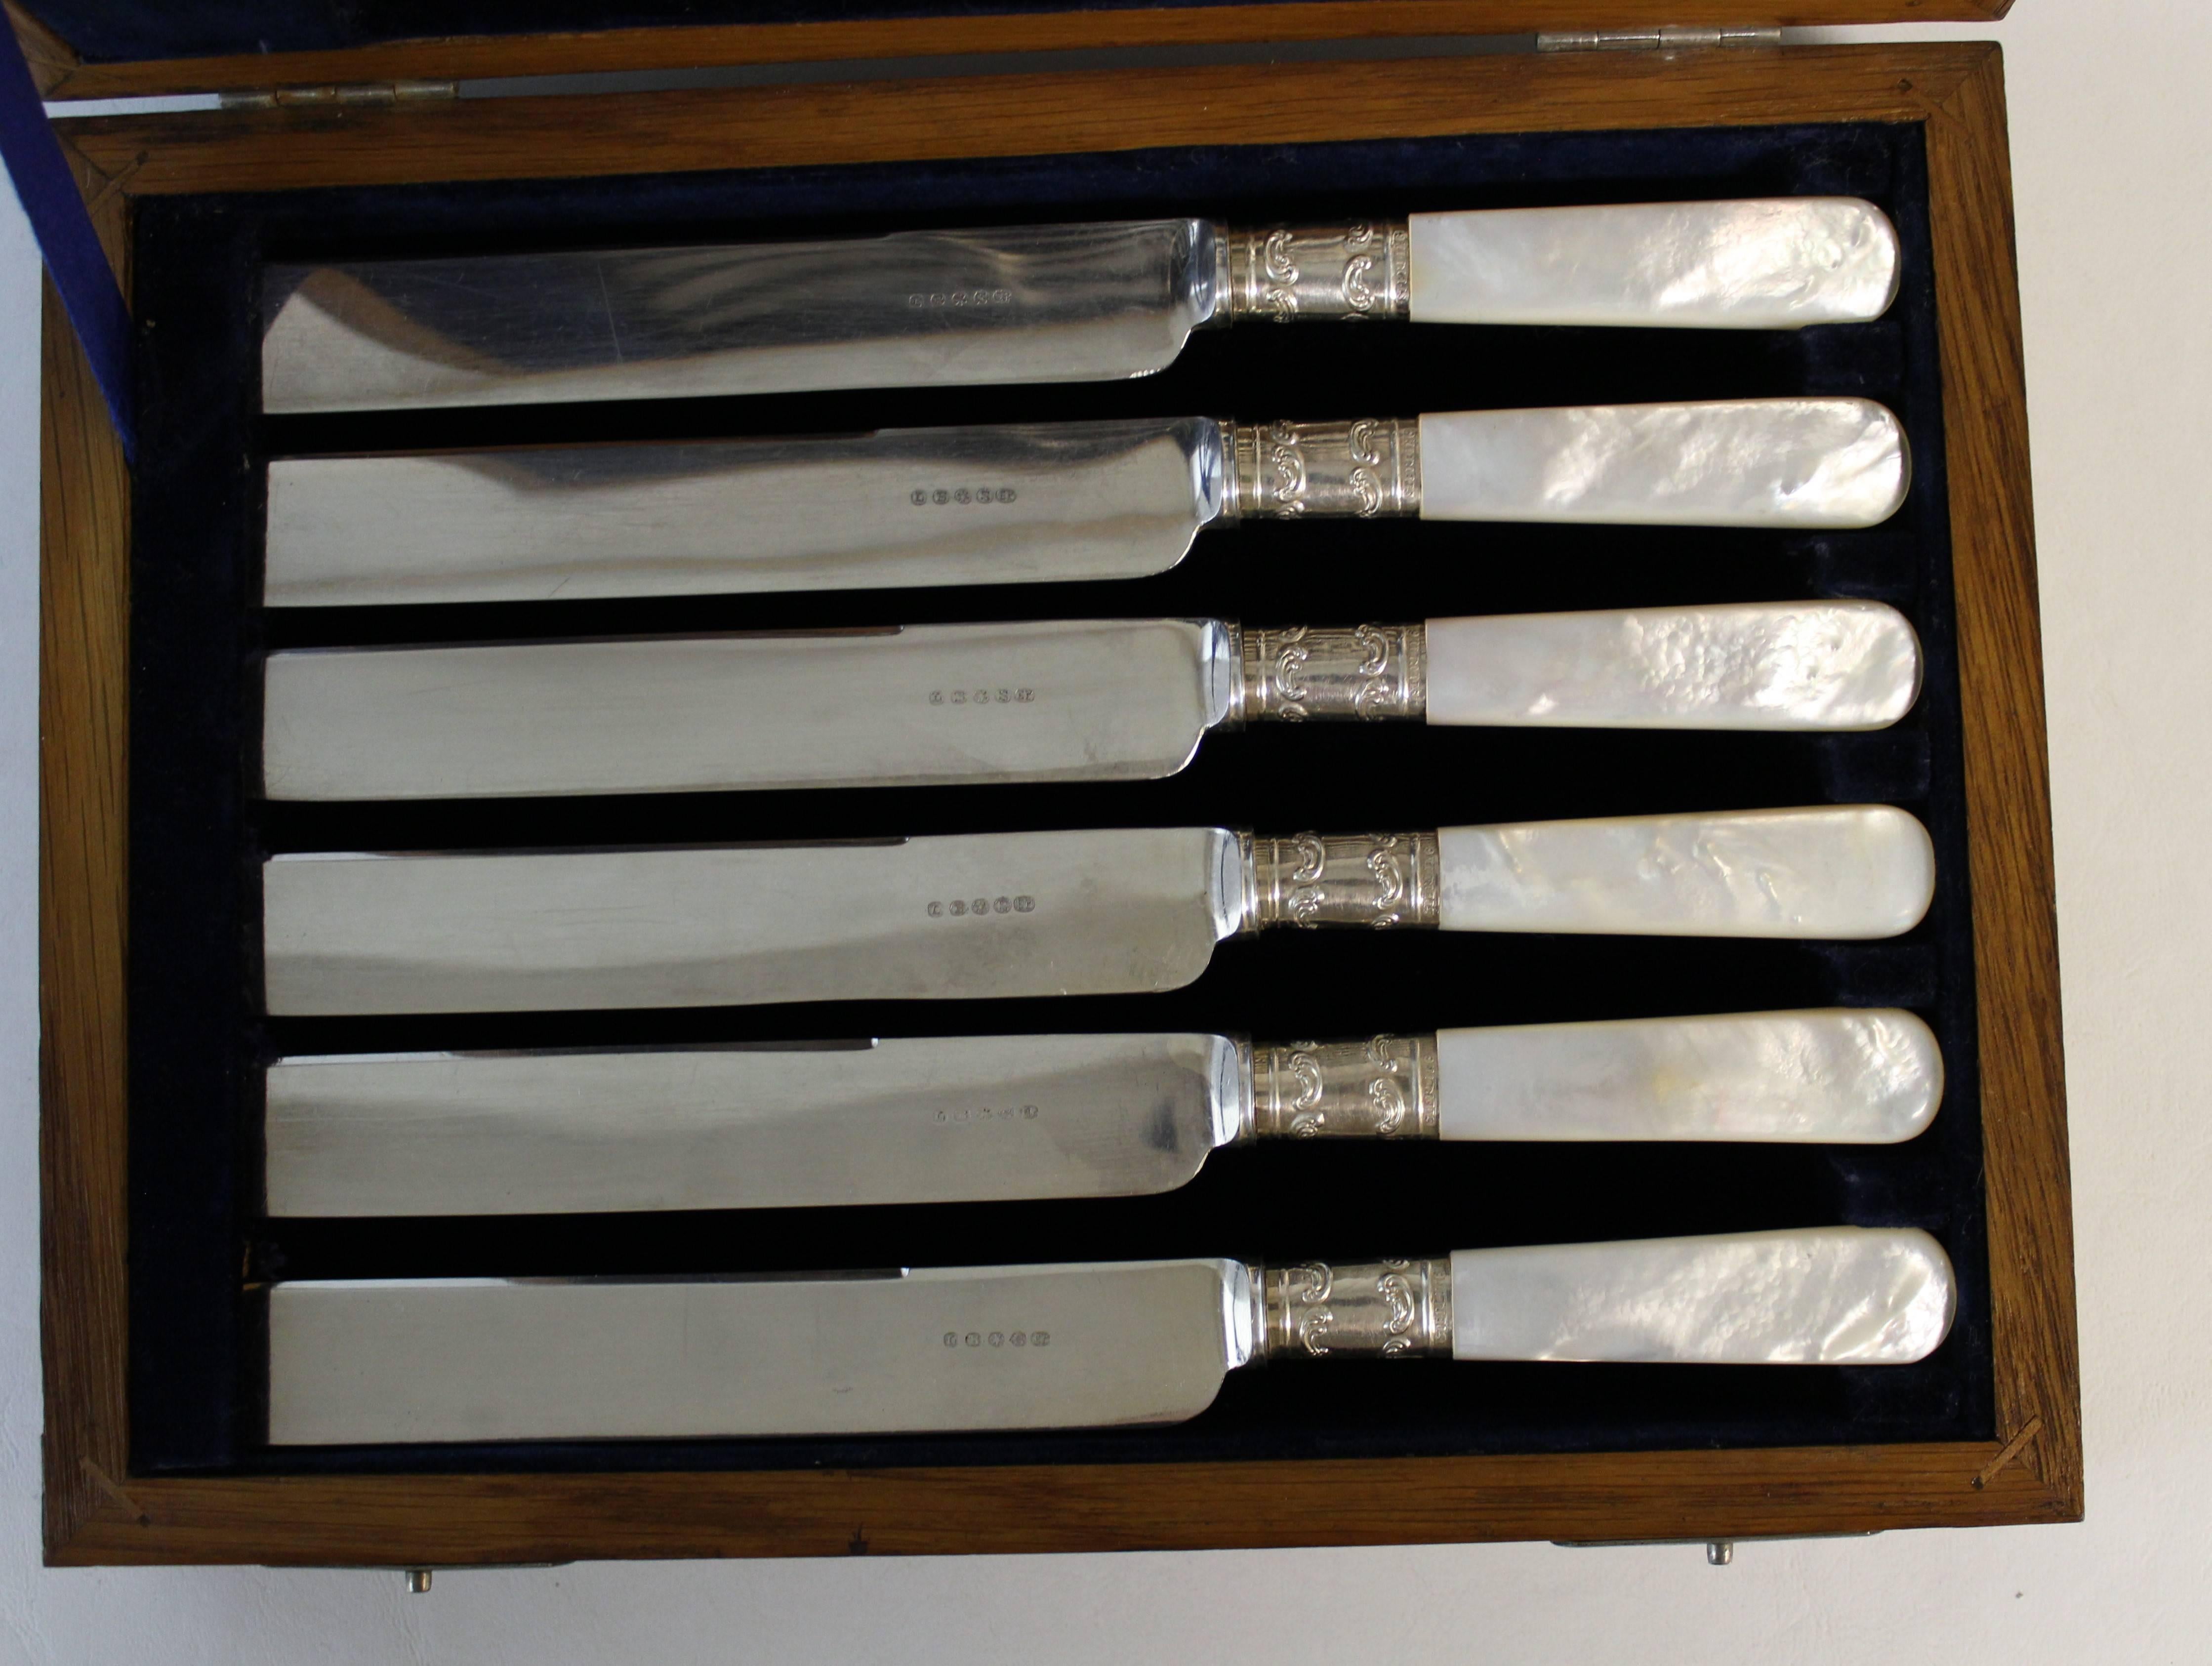 Details about   CUTLERS SILVERSMITH VINERS OF SHEFFIELD SET OF 6 PEARL HANDLED KNIVES 